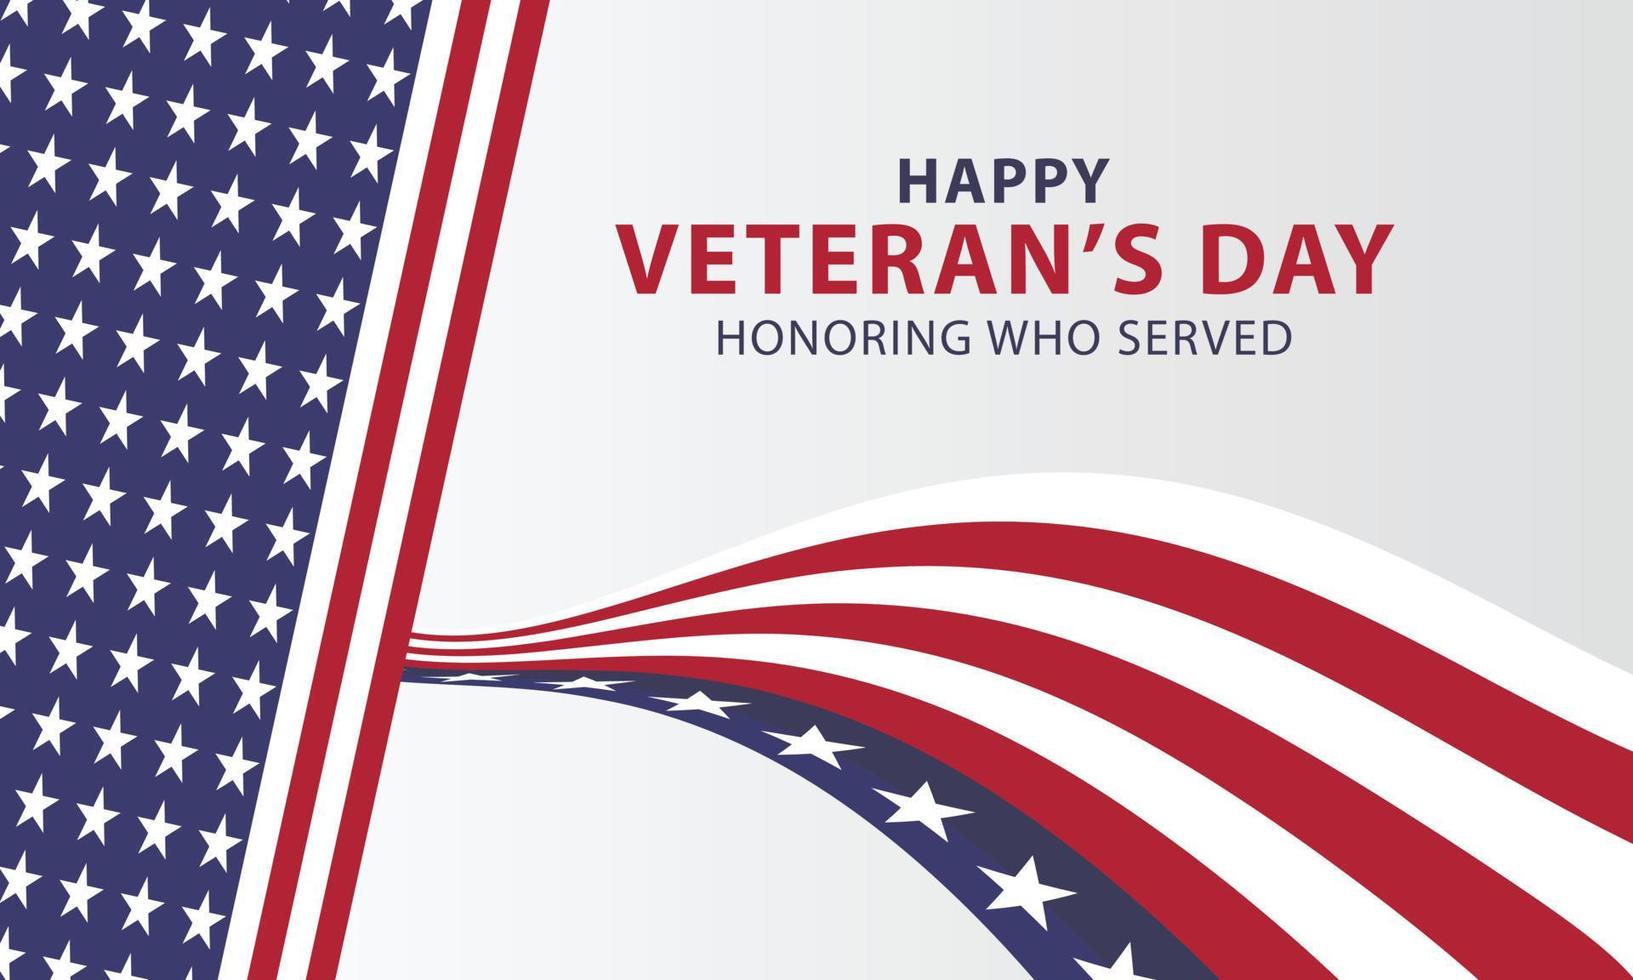 Veteran's day illustration with american flag vector